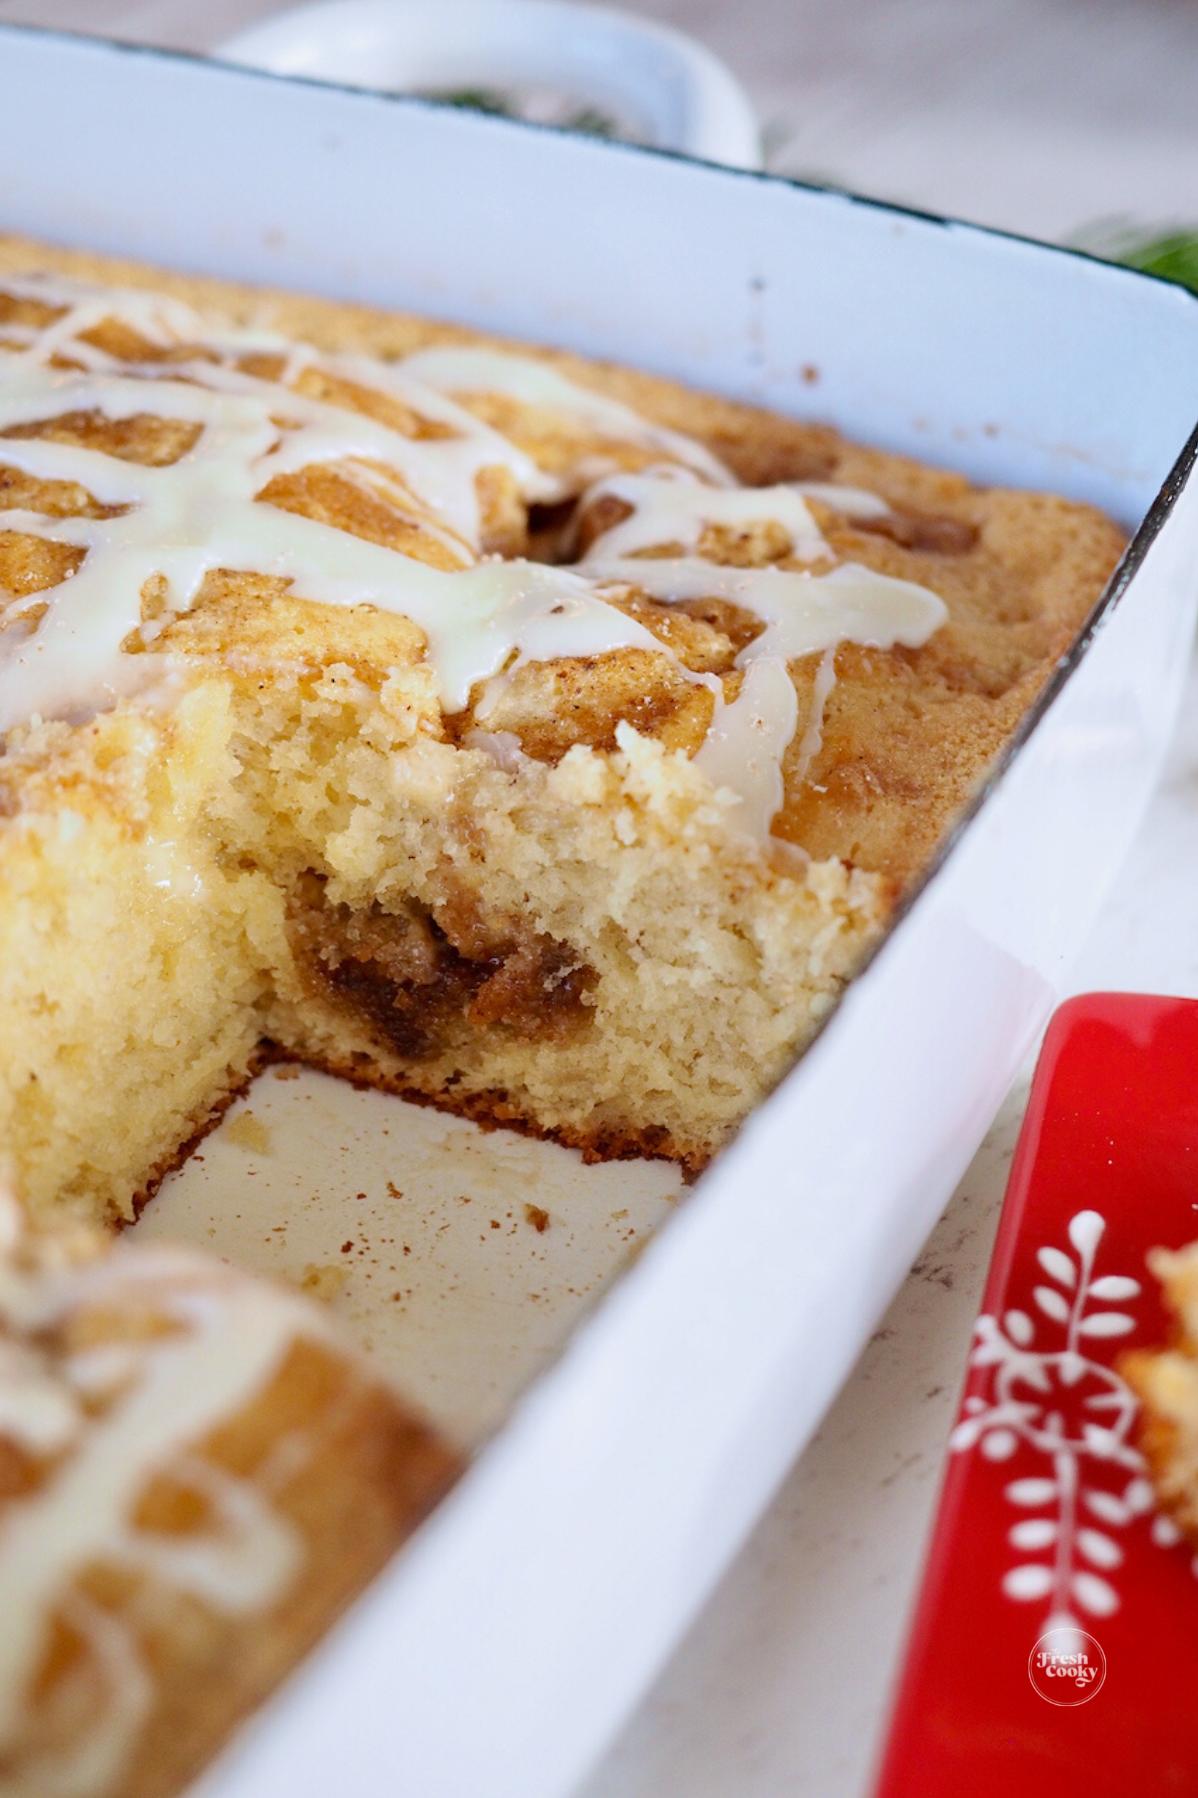  The aroma of this eggnog cake baking in the oven is absolutely divine.